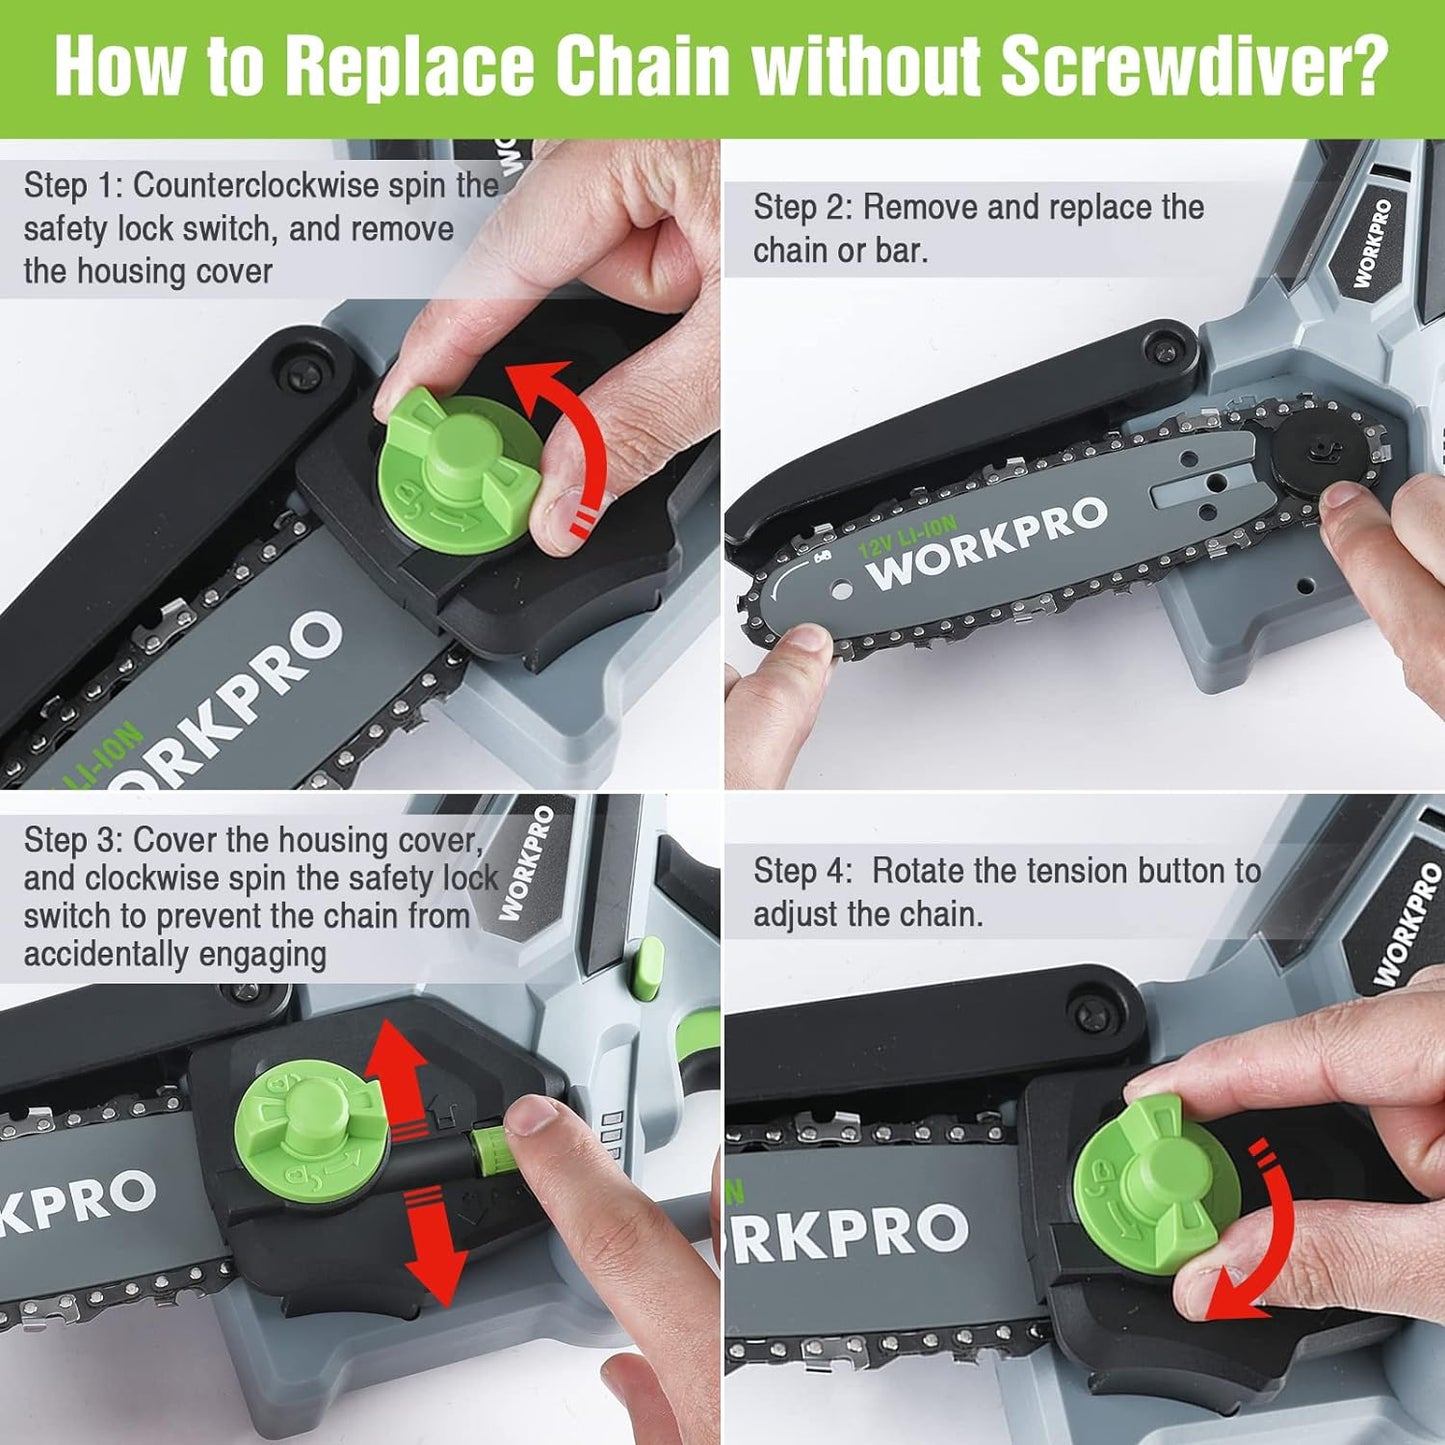 WORKPRO Mini Chainsaw, 6.3\u201C Cordless Electric Compact Chain Saw with 2 Batteries, One-Hand Operated Portable Wood Saw with Replacement Guide Bar and Chain for Garden Tree Branch Pruning, Wood Cutting